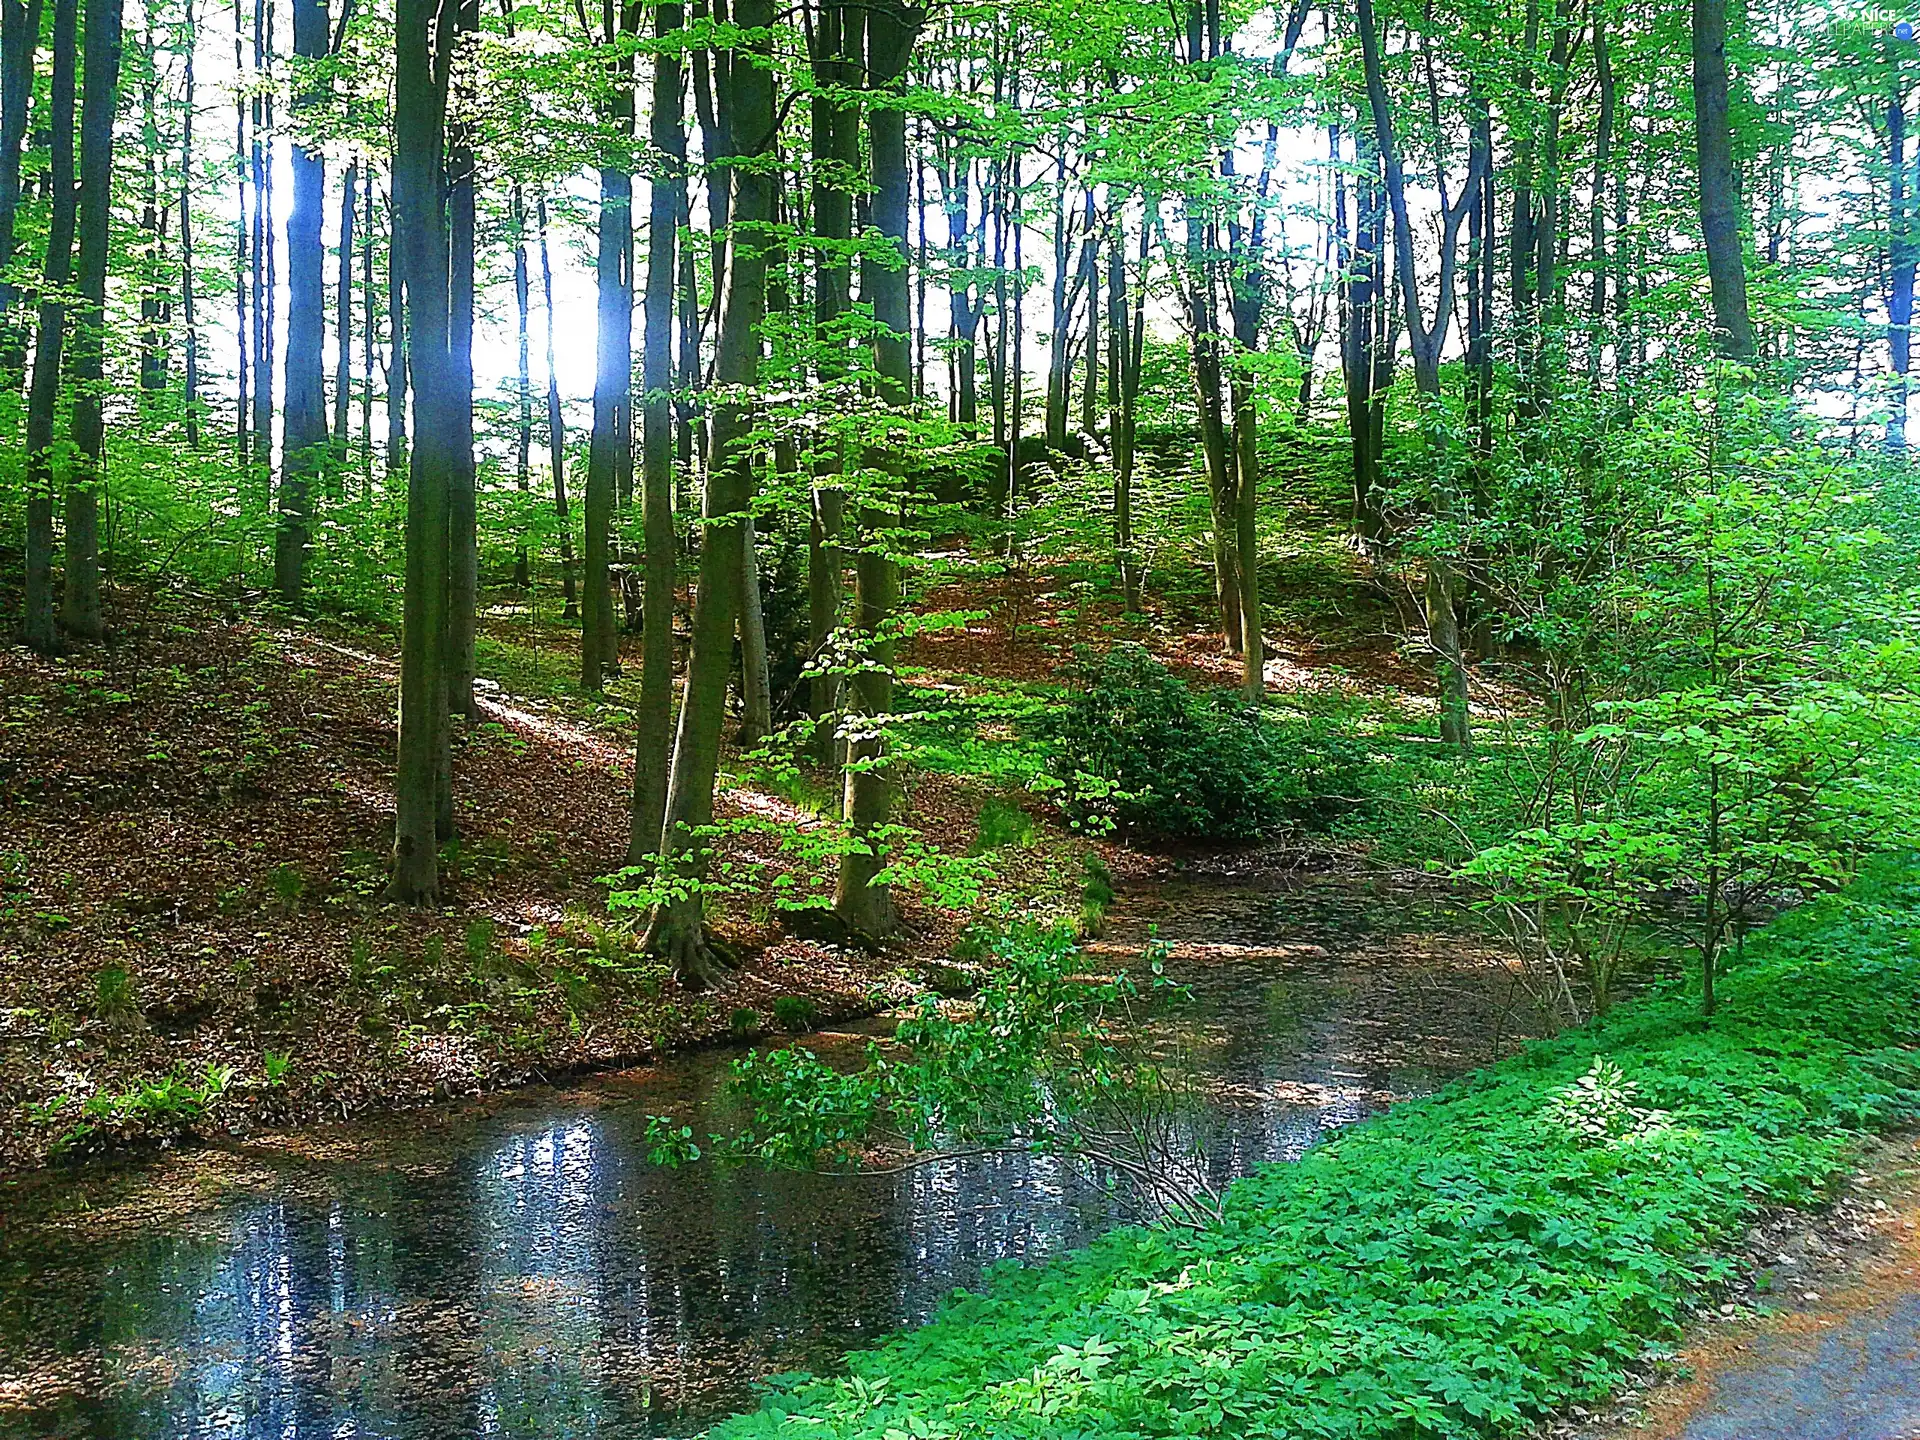 River, trees, viewes, forest